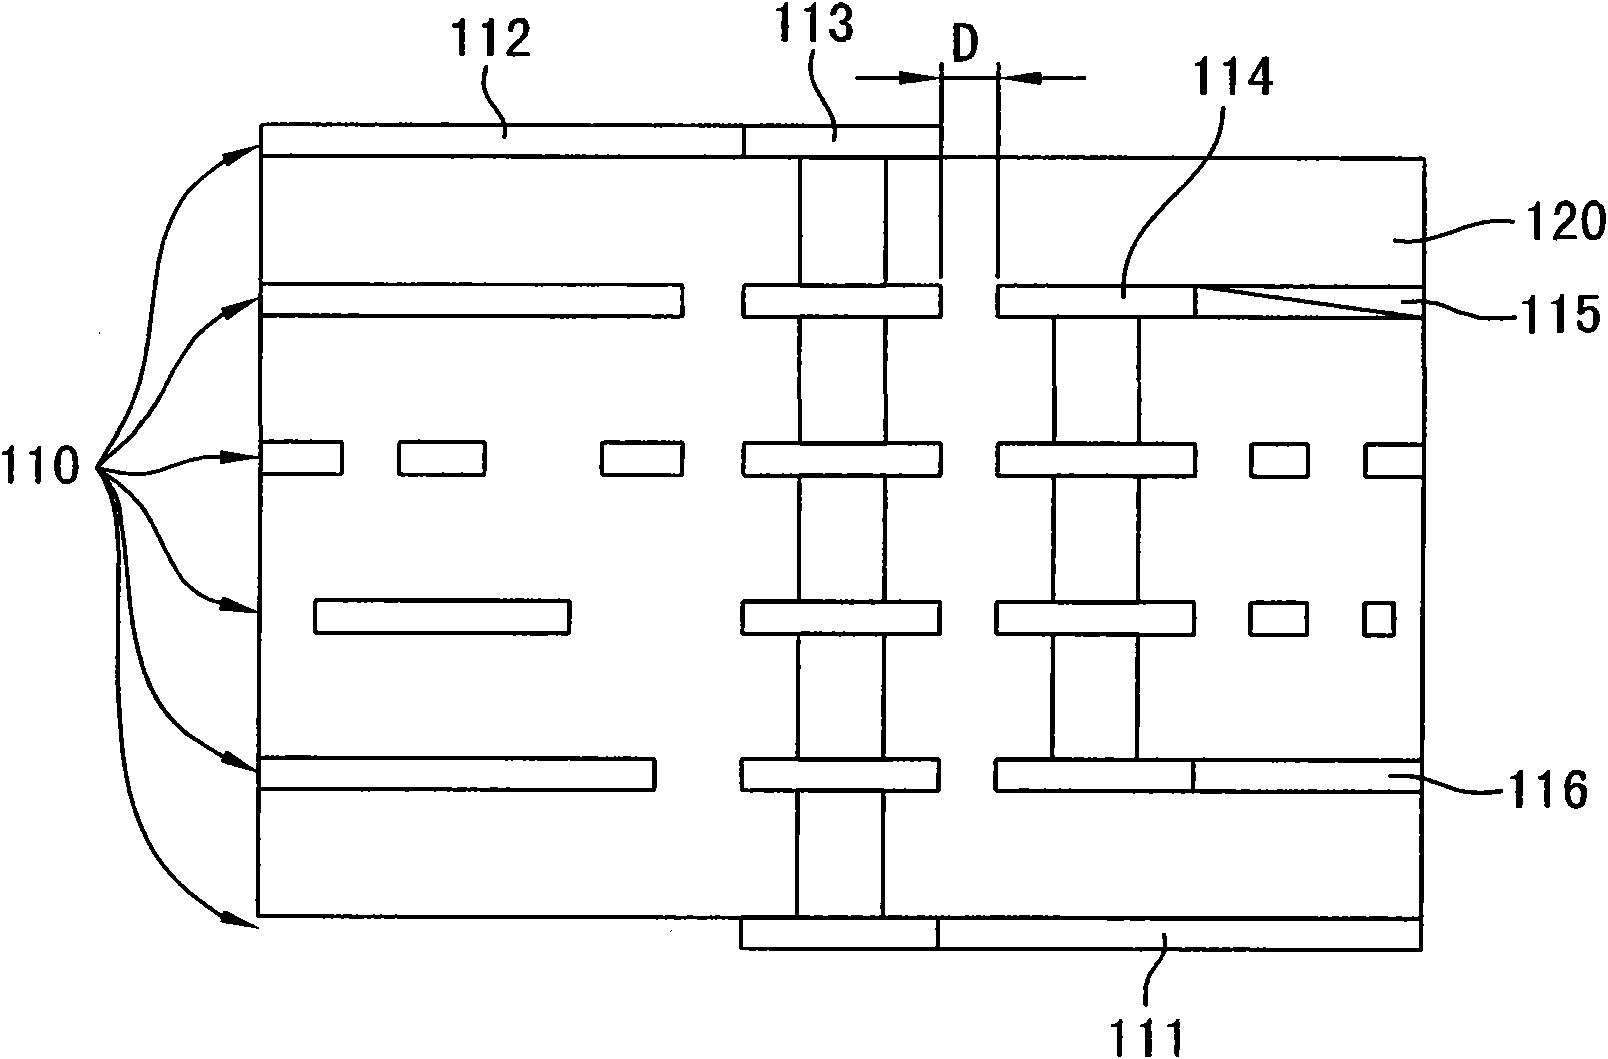 Transmission hole of matched high frequency broadband impedance